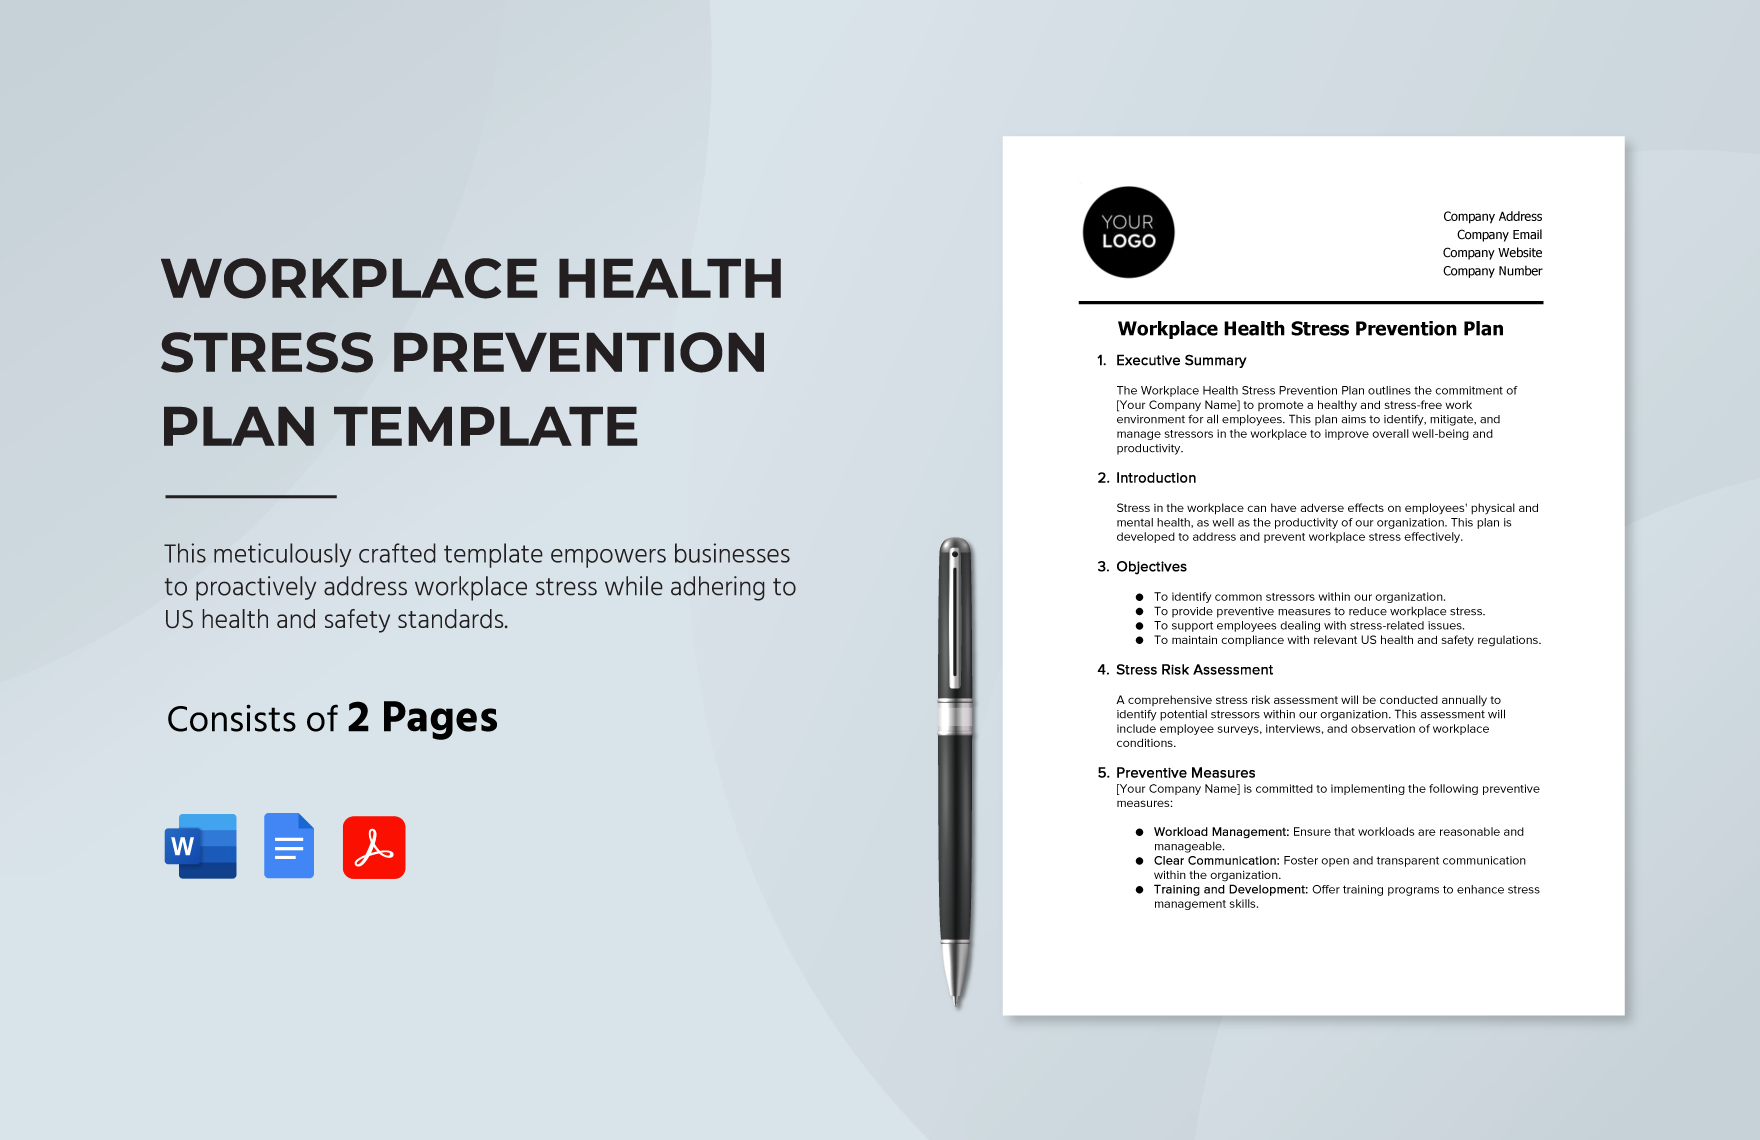 Workplace Health Stress Prevention Plan Template in Word, Google Docs, PDF